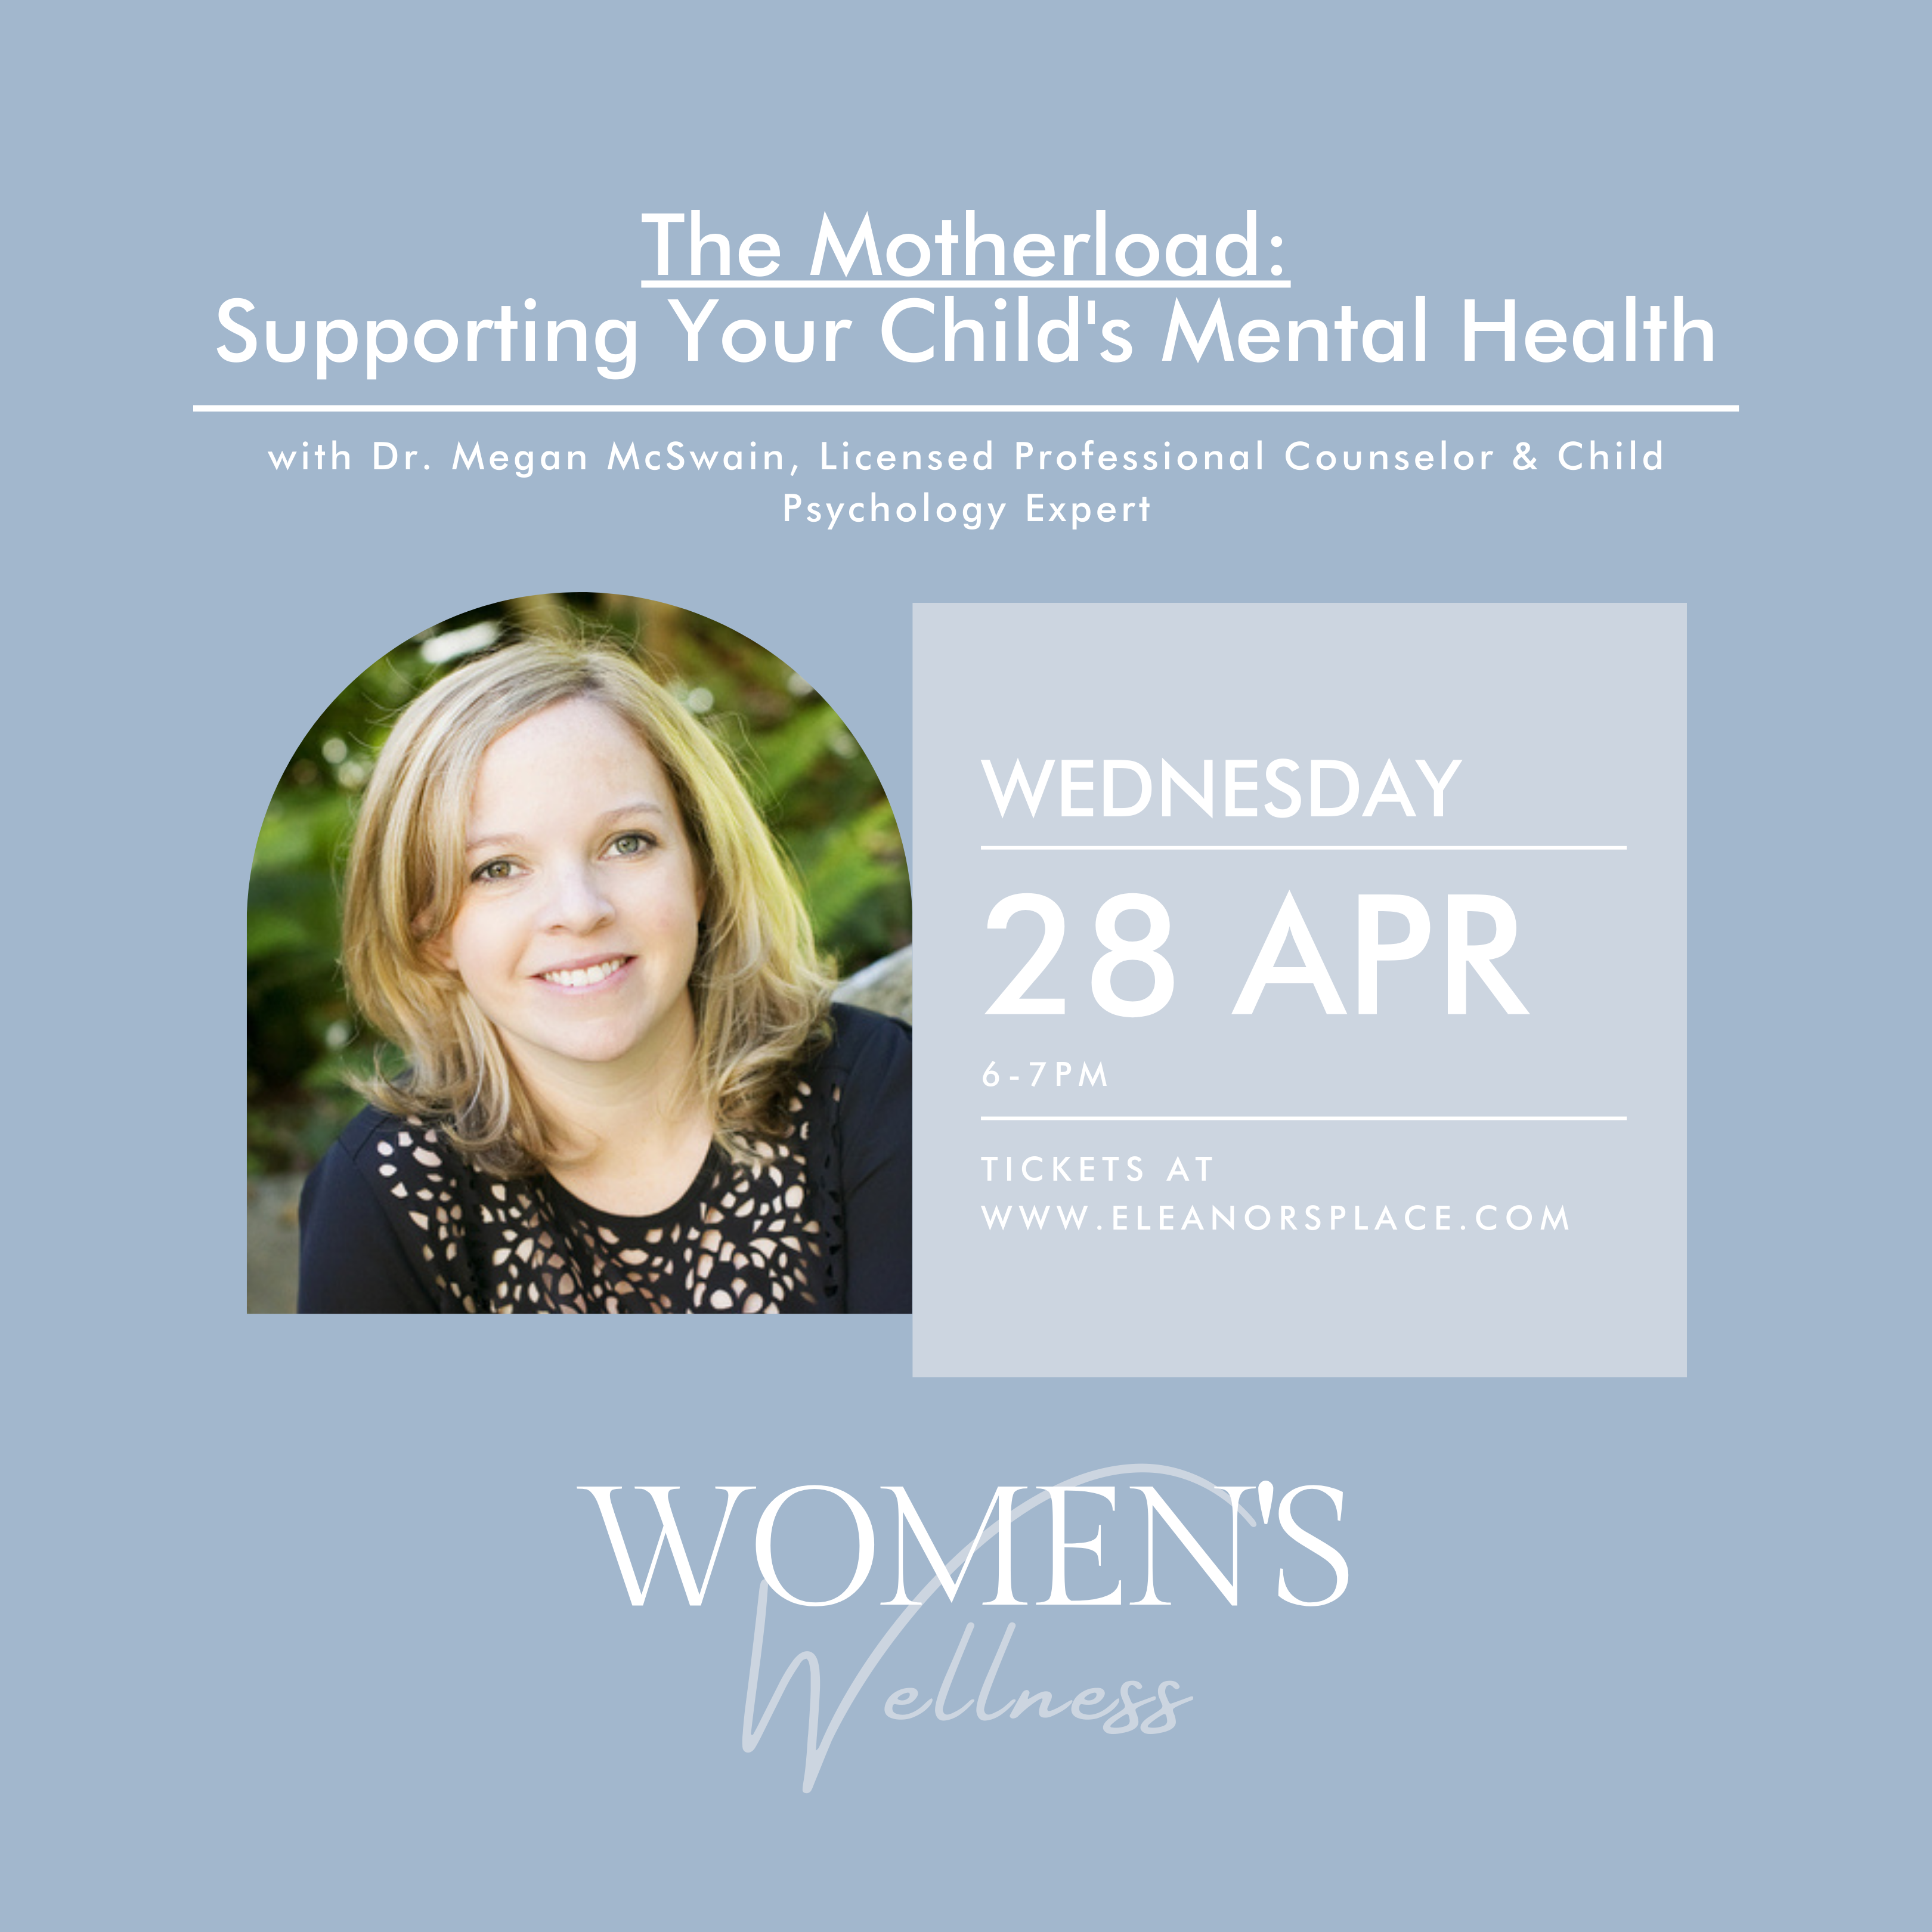 The Motherload: Supporting Your Child’s Mental Health